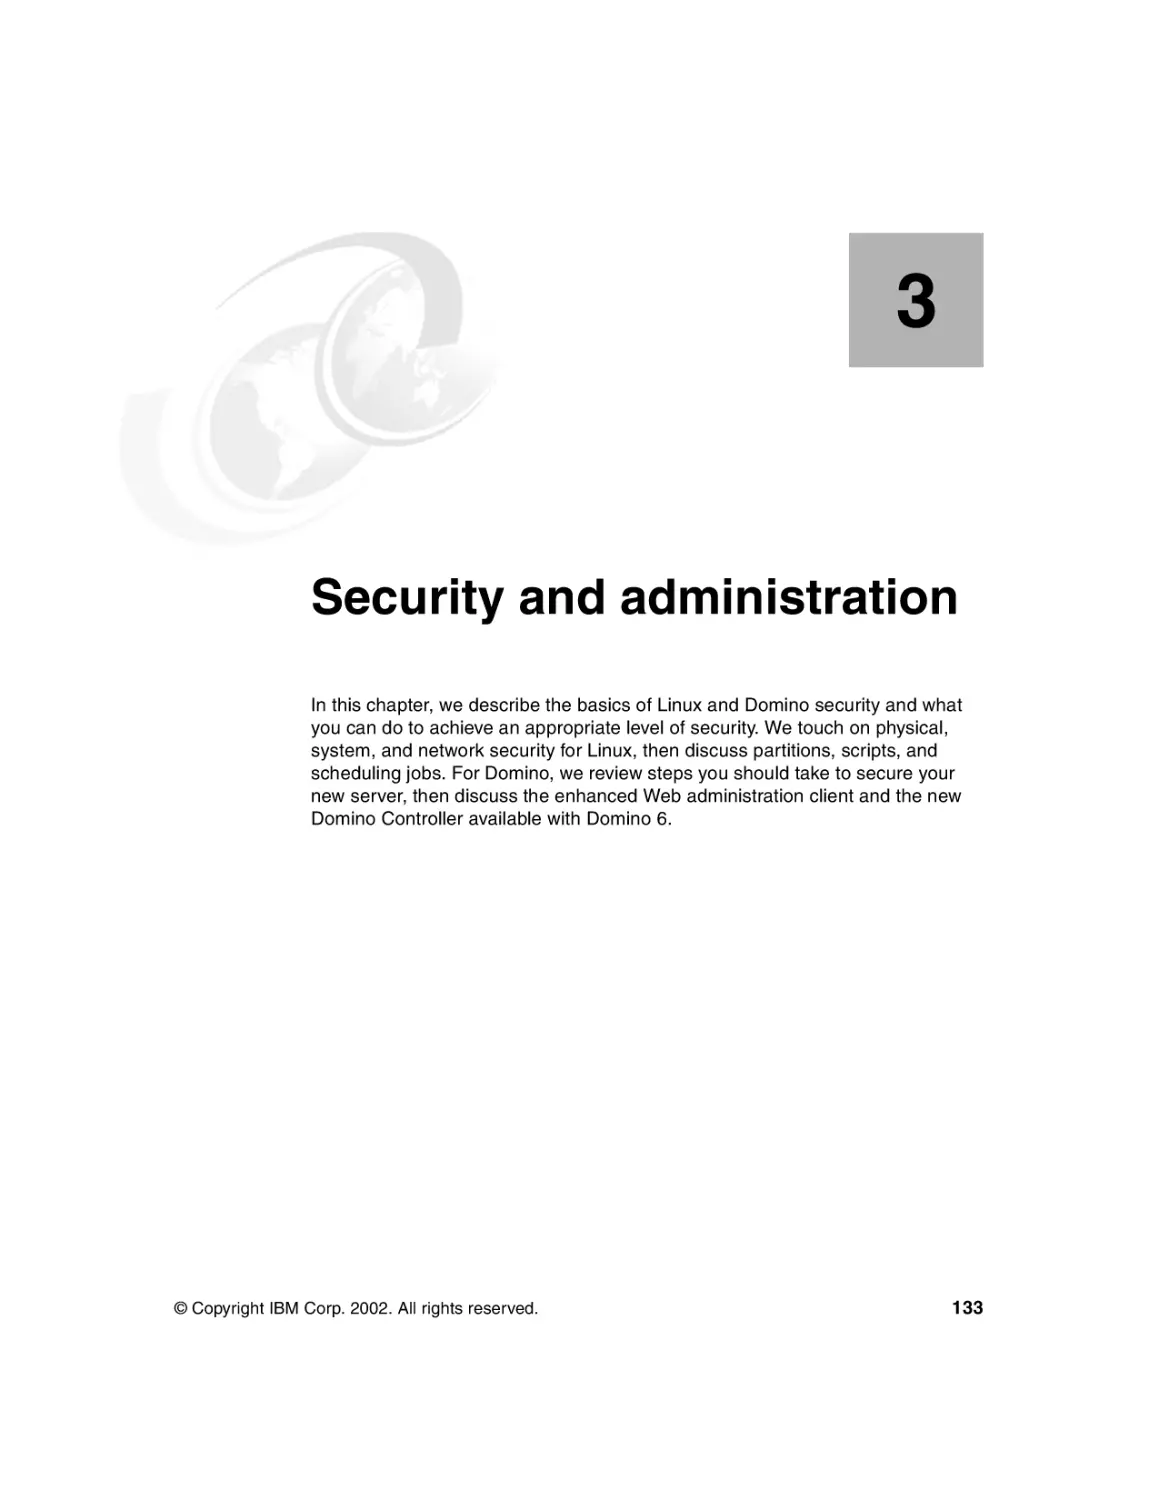 Chapter 3. Security and administration